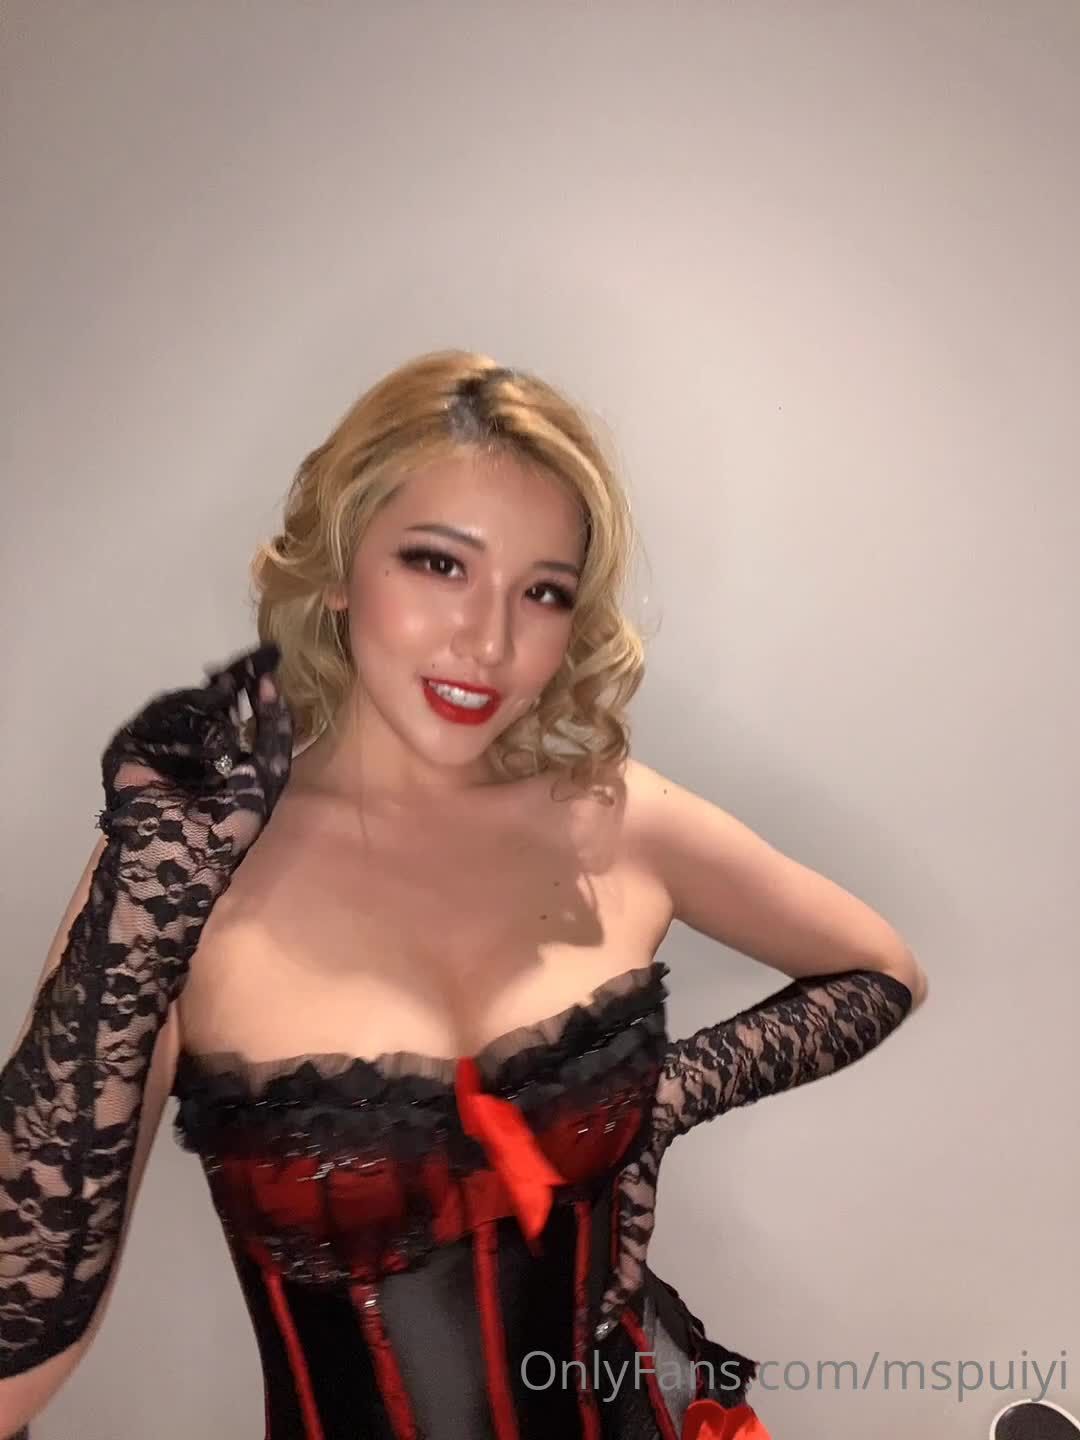 Cunnilingus OnlyFans ms_puiyi Latest Video Leaked 11112020004 TXXX